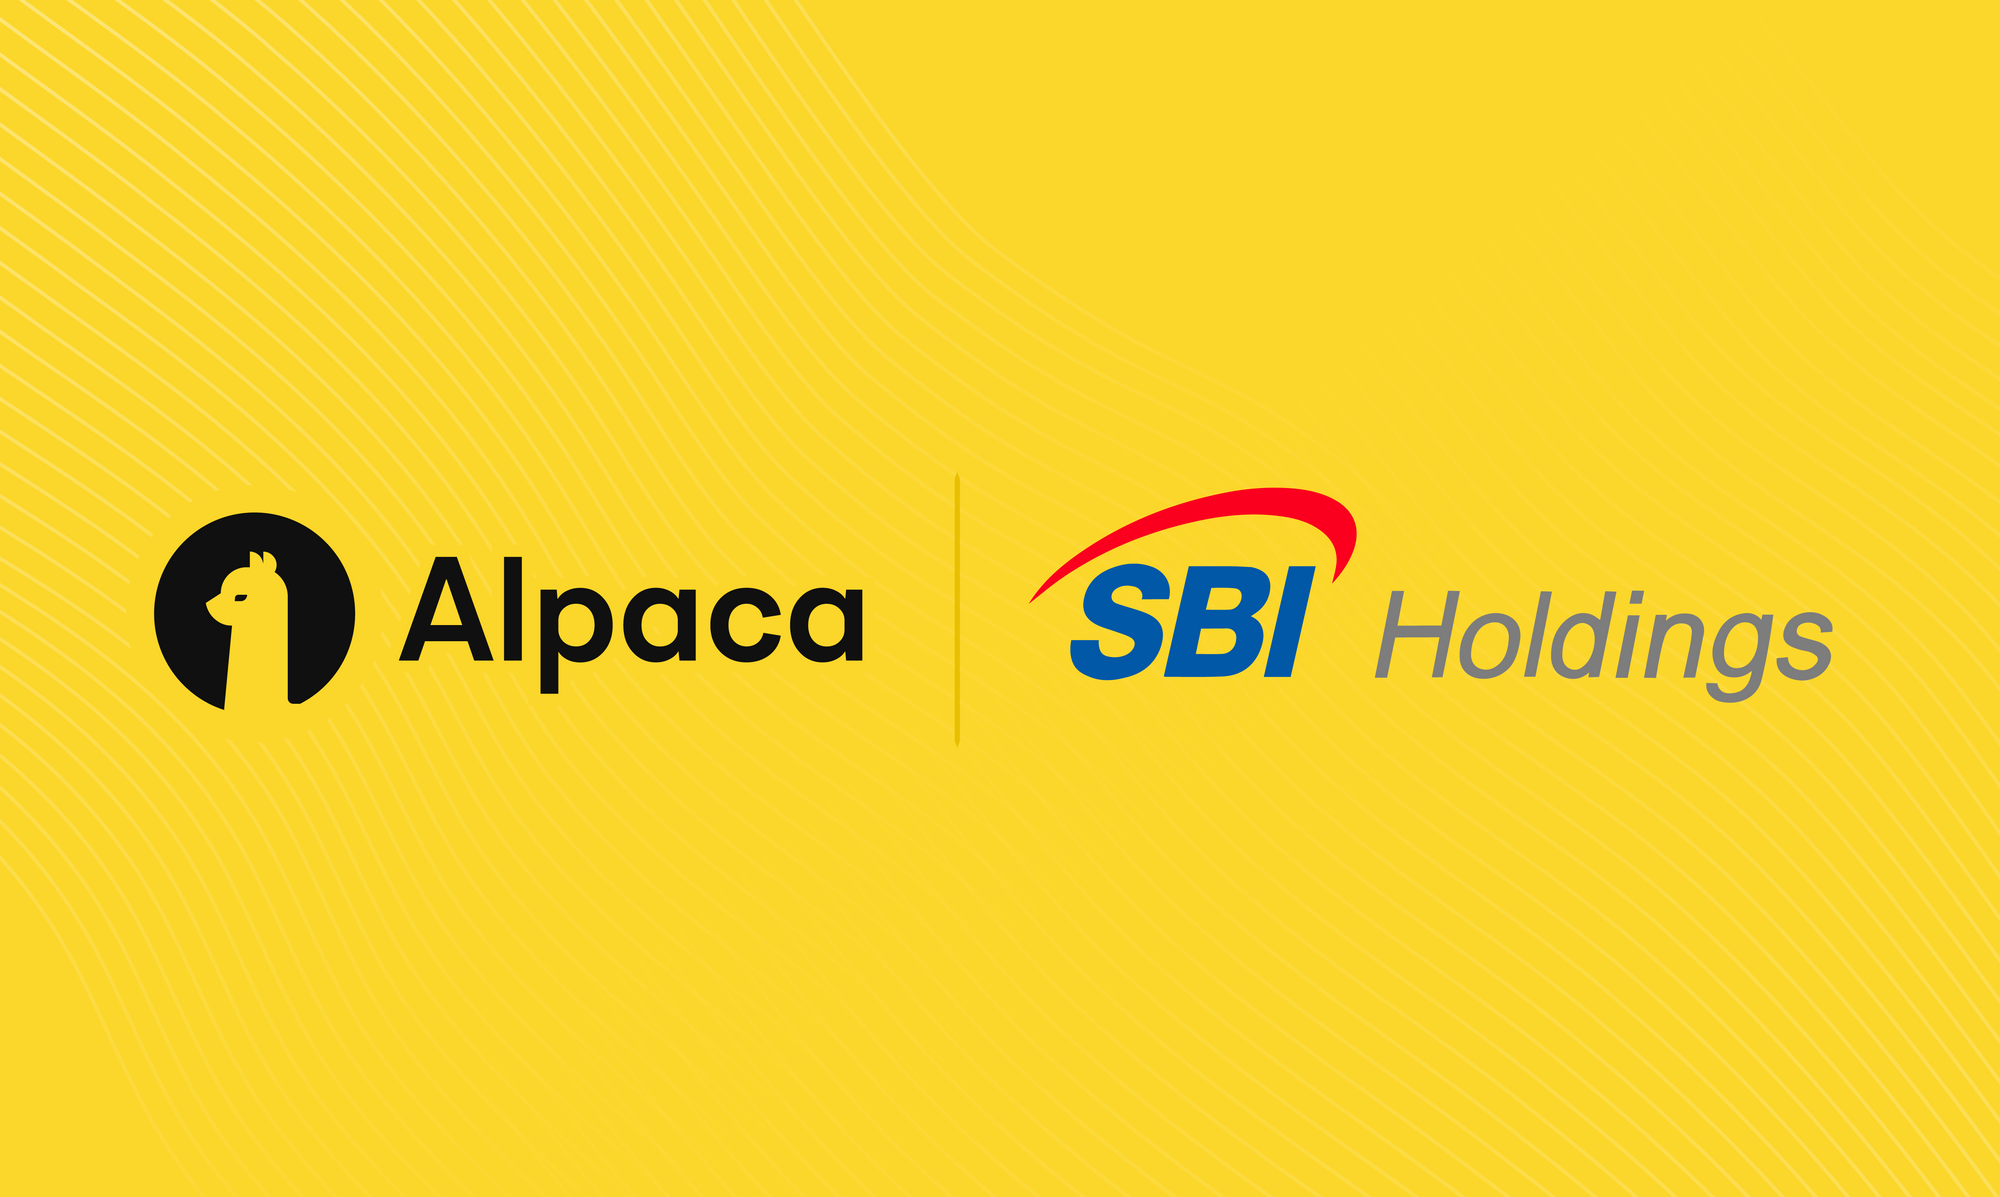 Alpaca and Japan’s SBI Holdings Announce Partnership and USD 15 Million Strategic Investment to Accelerate Alpaca’s Asian Business